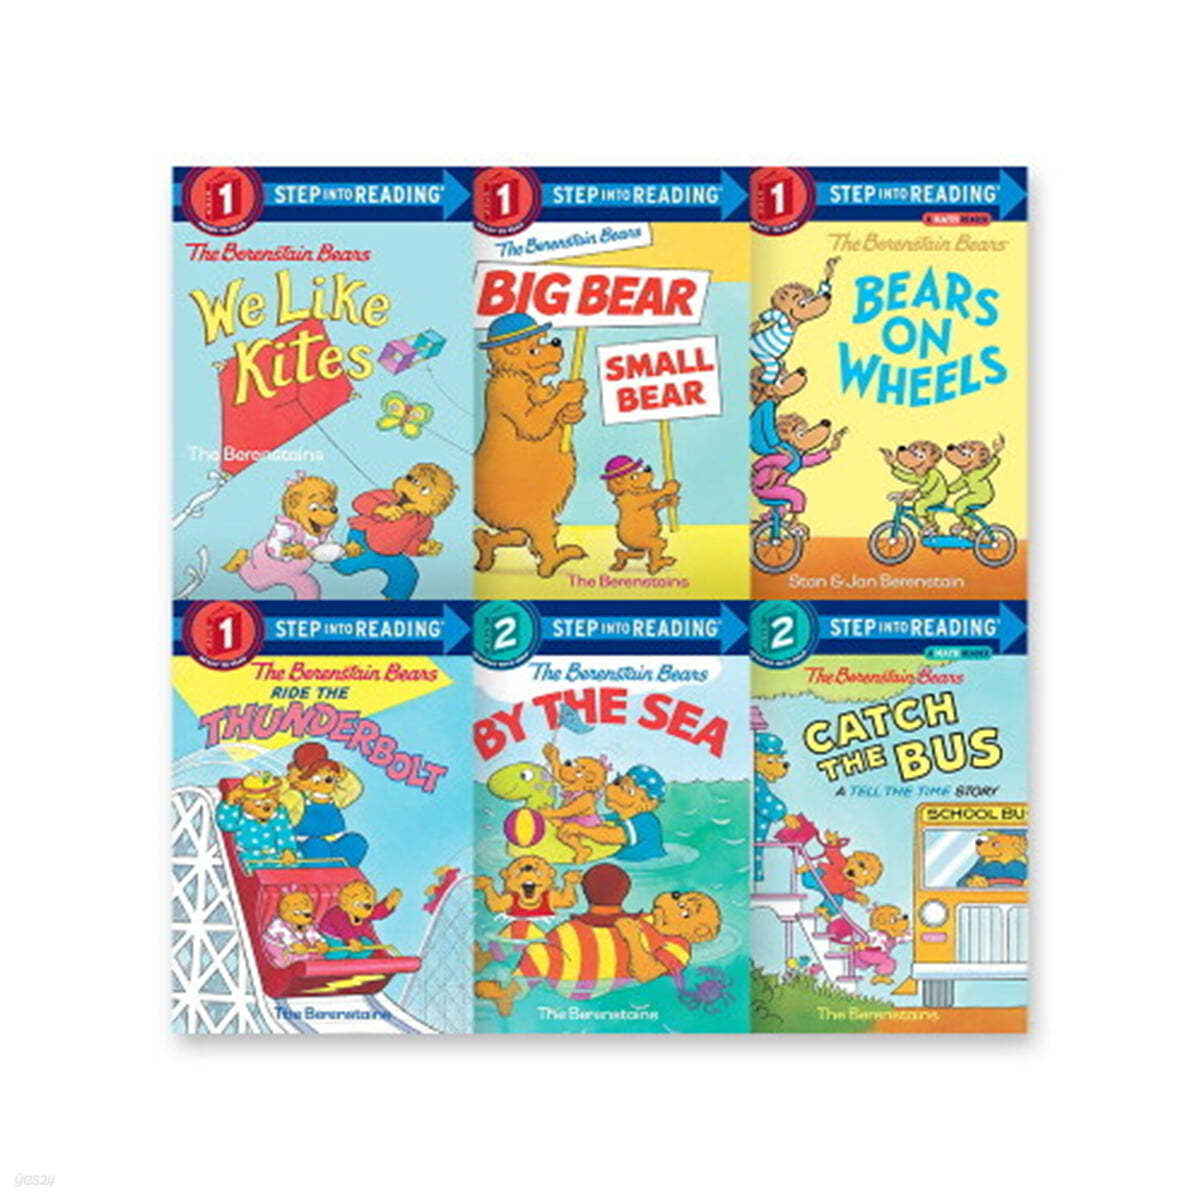 Step into Reading(Step1,2): Berenstain Bears 6종 세트